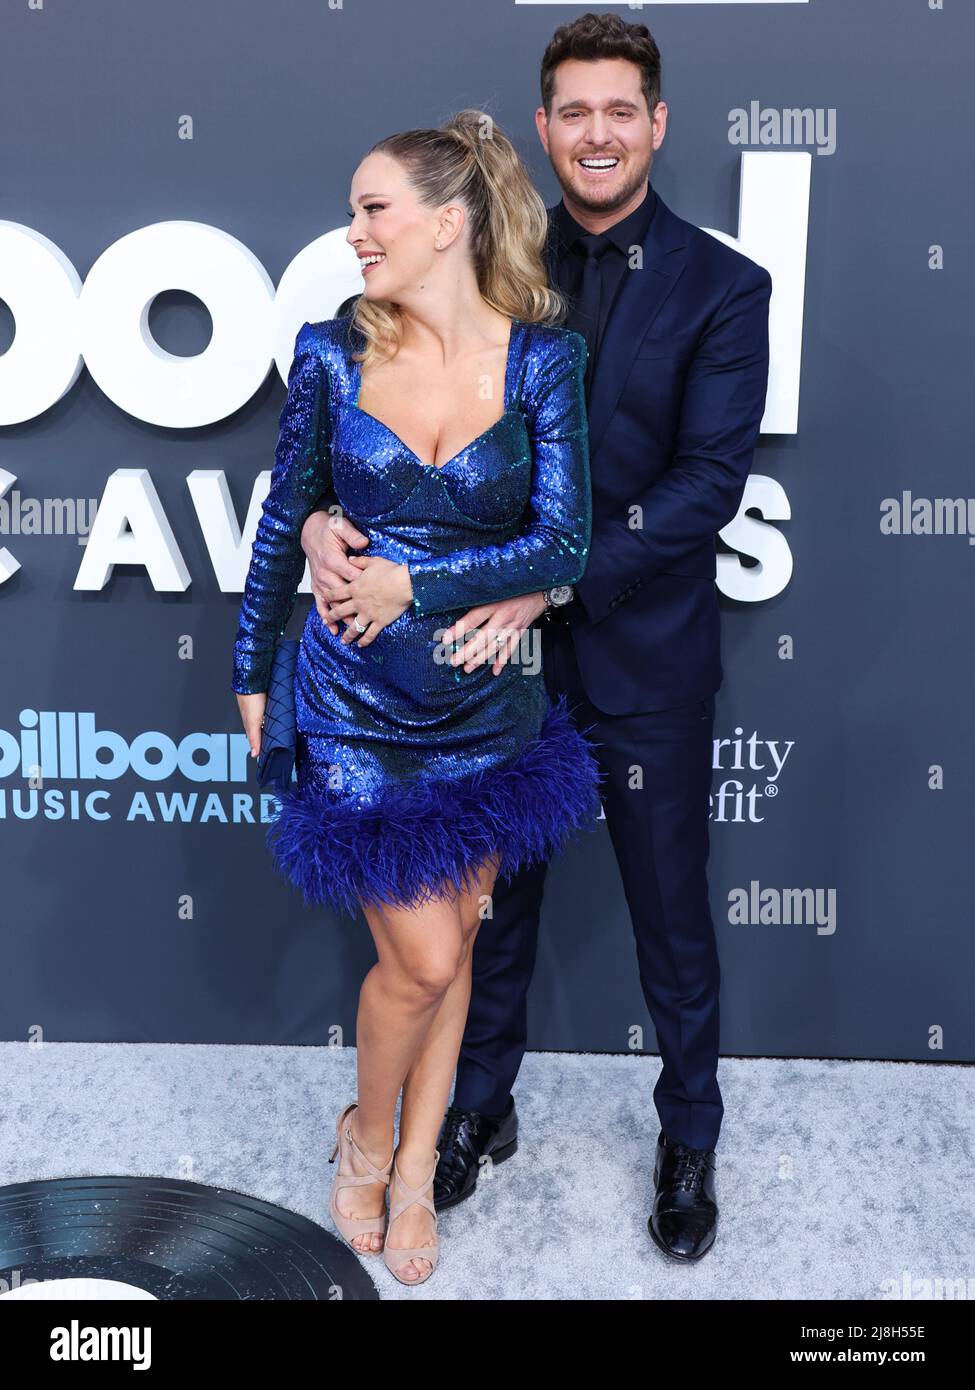 LAS VEGAS, NEVADA, USA - MAY 15: Michael Bublé (Michael Buble) and Luisana Lopilato arrive at the 2022 Billboard Music Awards held at the MGM Grand Garden Arena on May 15, 2022 in Las Vegas, Nevada, United States. (Photo by Xavier Collin/Image Press Agency) Stock Photo